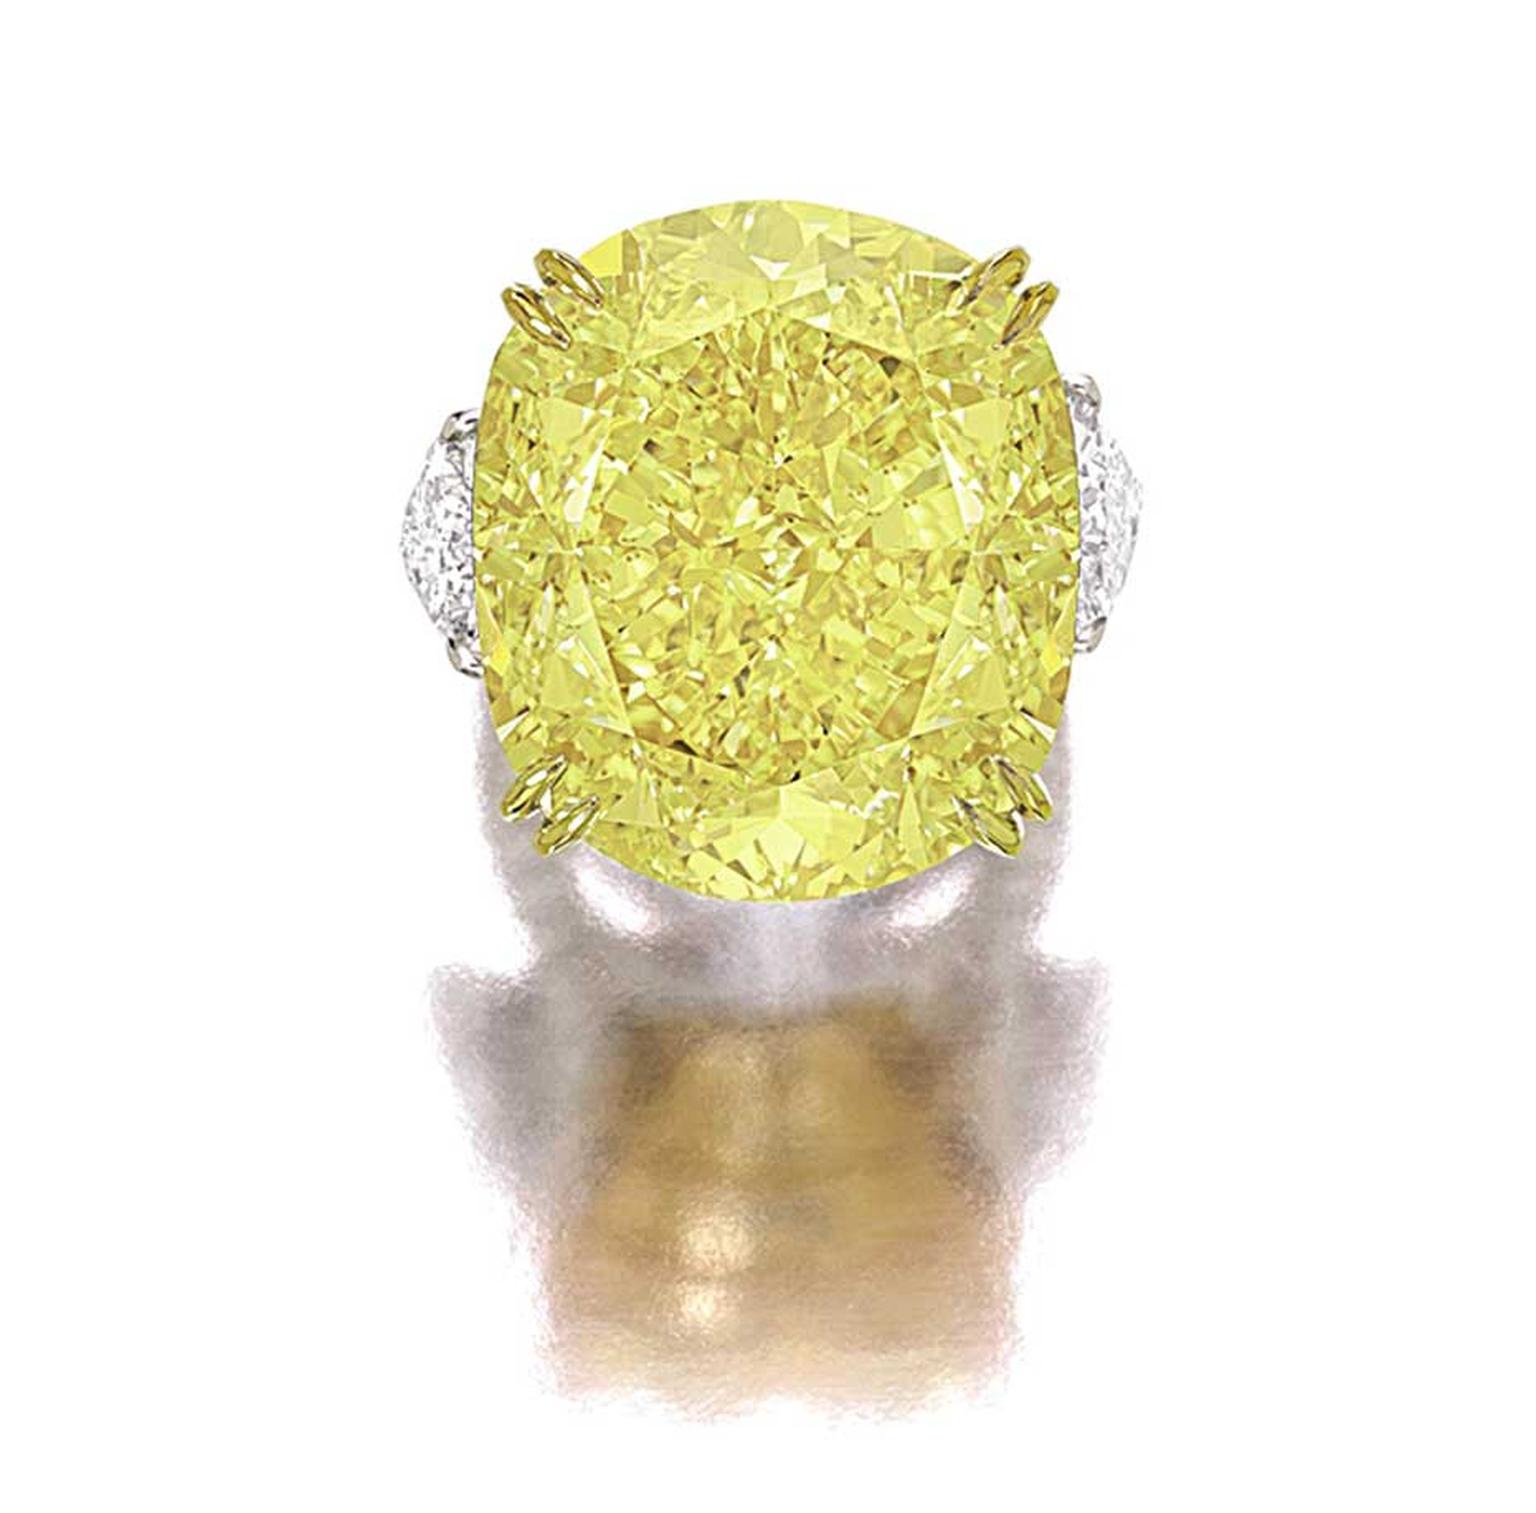 The top lot at Sotheby’s Hong Kong Magnificent Jewels and Jadeite spring sale is a 77.77ct VS2 Fancy Vivid yellow diamond ring with an estimate of US$6.8m-7.5m.